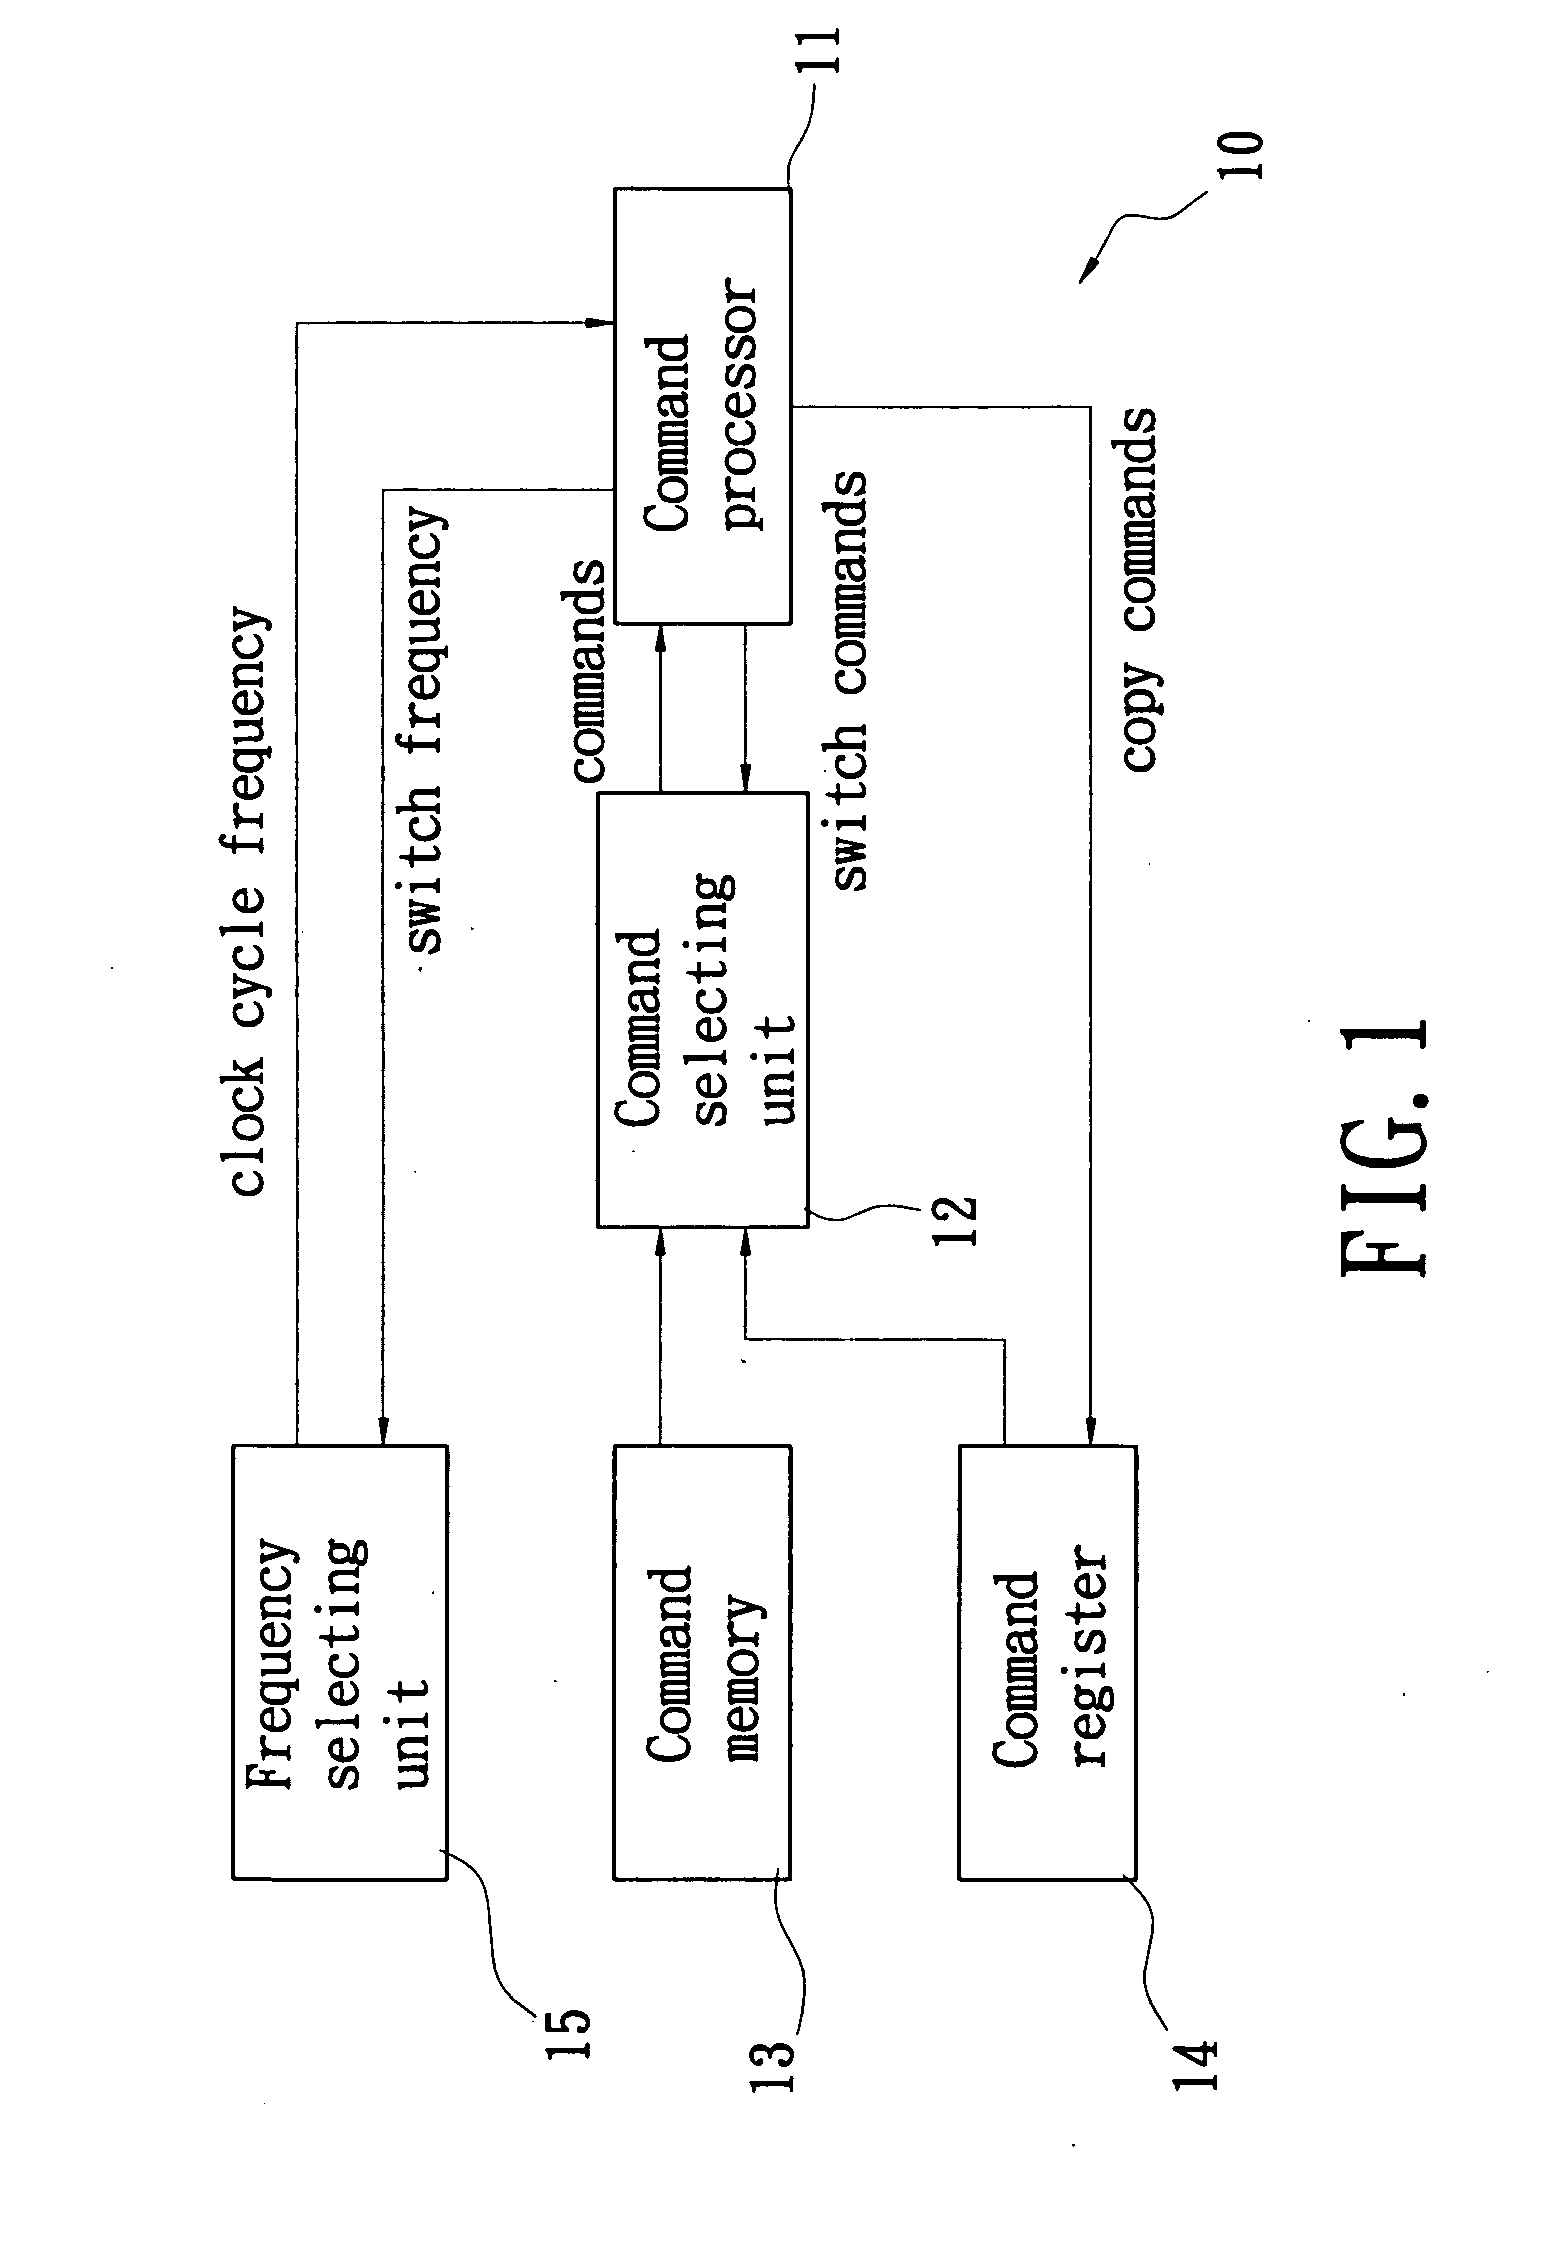 Method of speeding up execution of repeatable commands and microcontroller able to speed up execution of repeatable commands